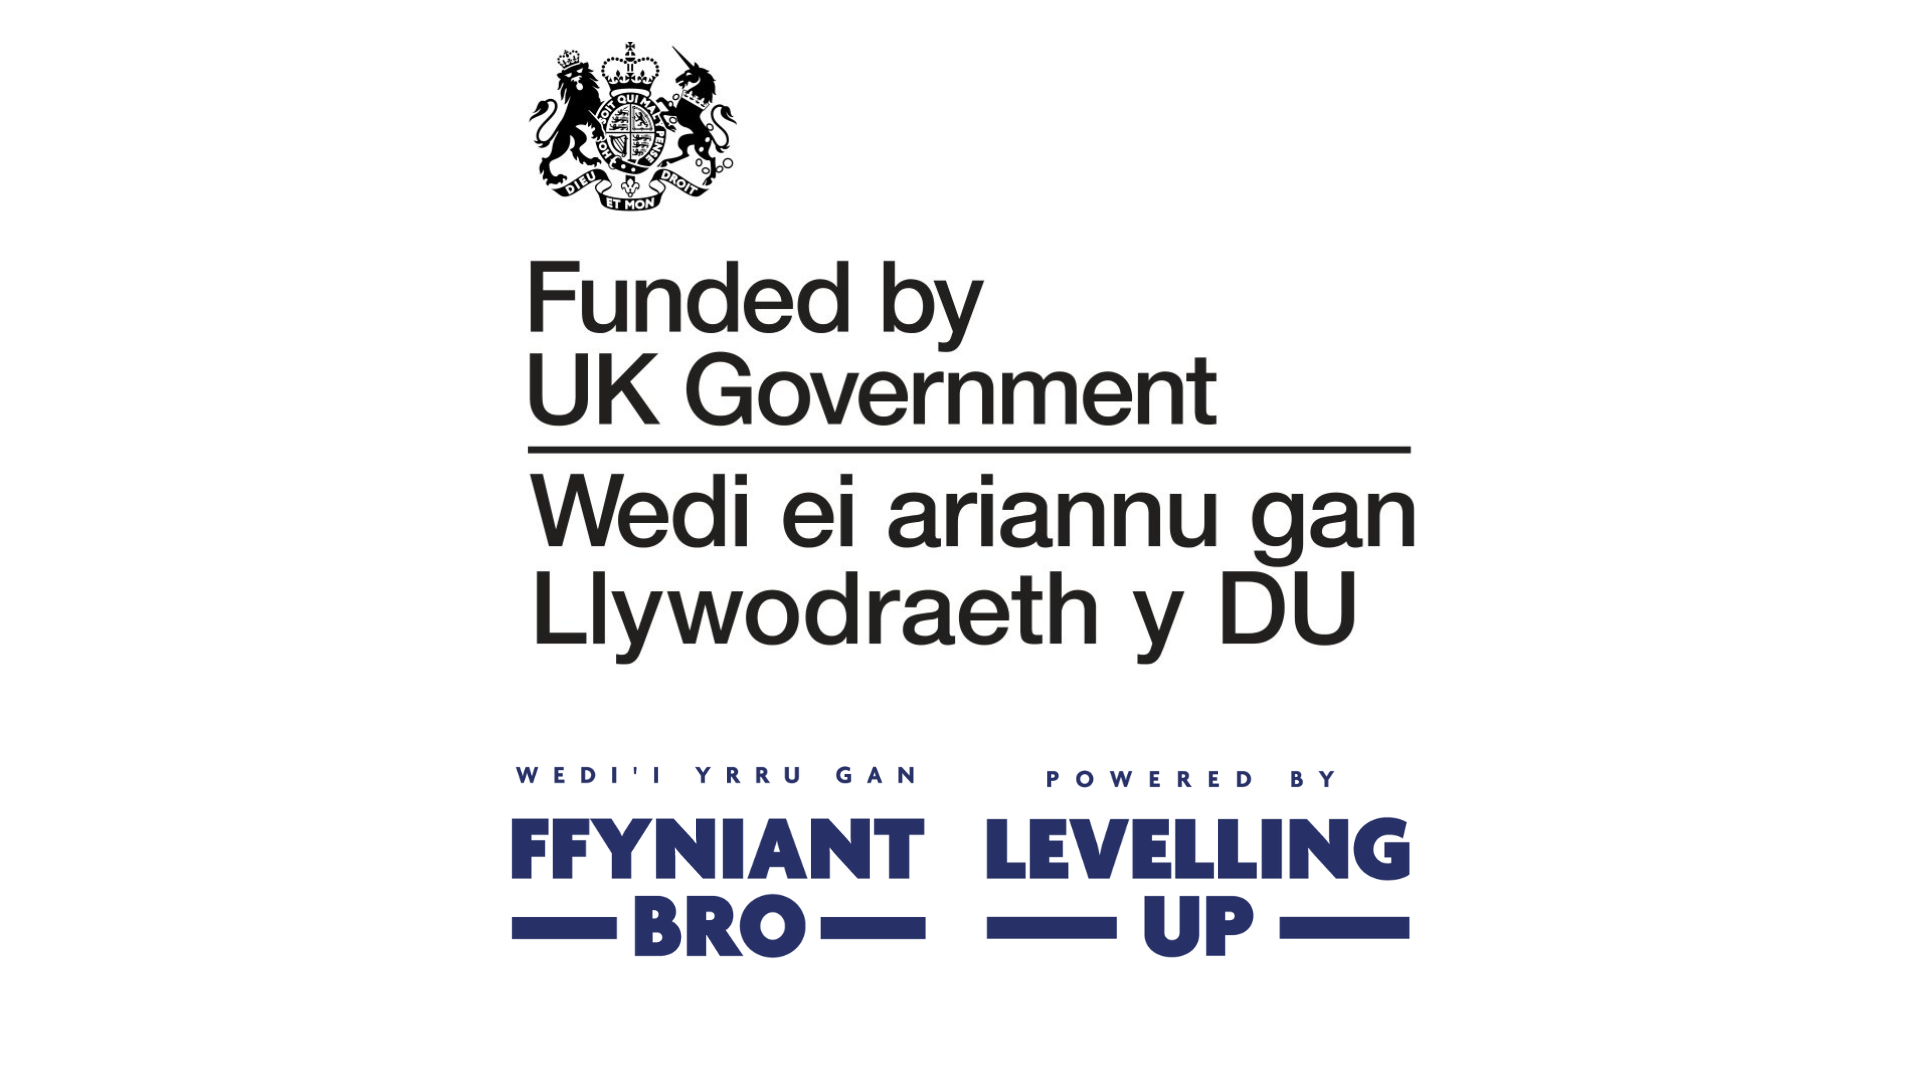 Funded by UK Government logo and Levelling Up logo